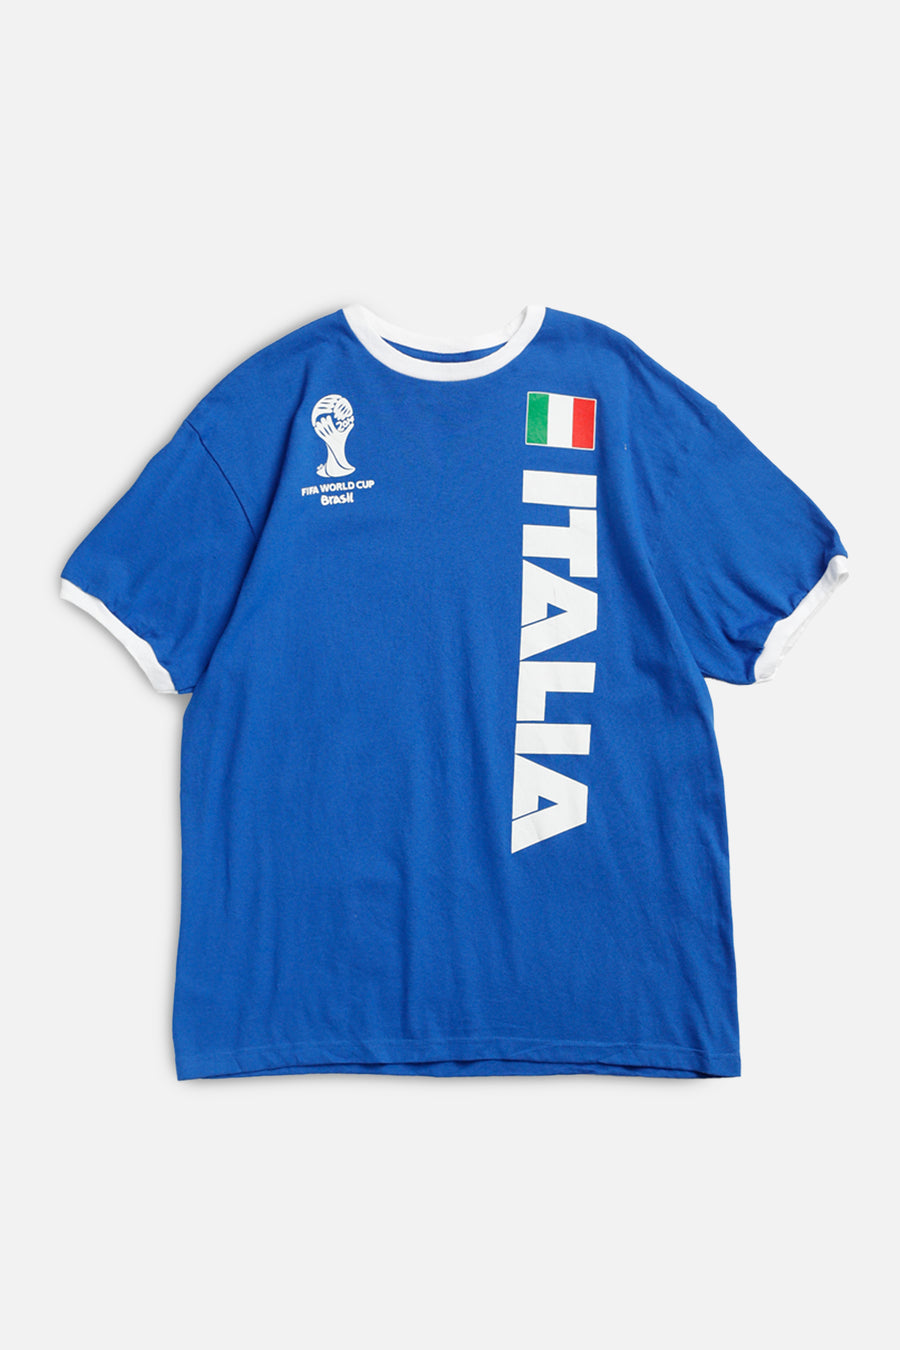 Vintage Italy Soccer Tee - M